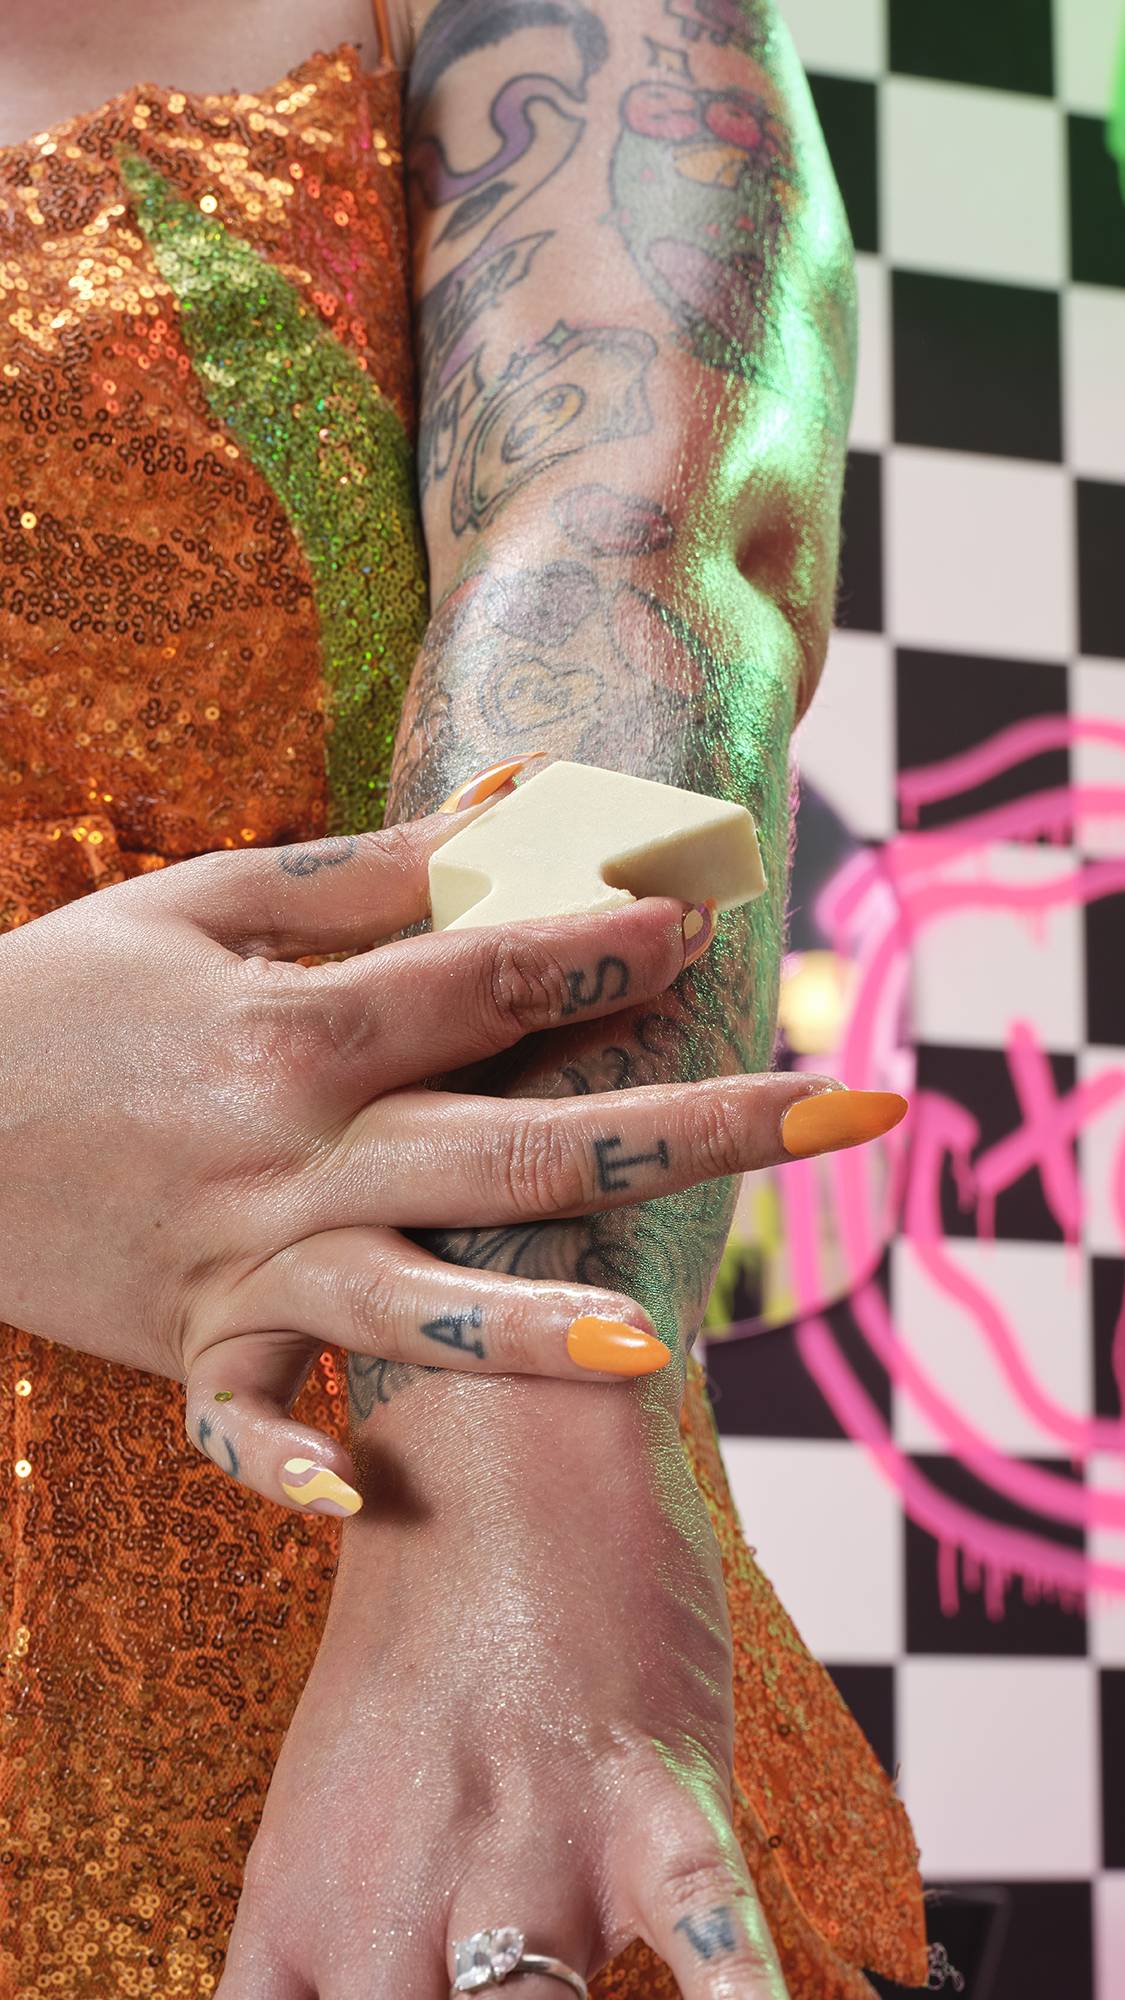 A close-up of the model smoothing the massage bar over their arm. They have an orange sequin dress on a checkered background.